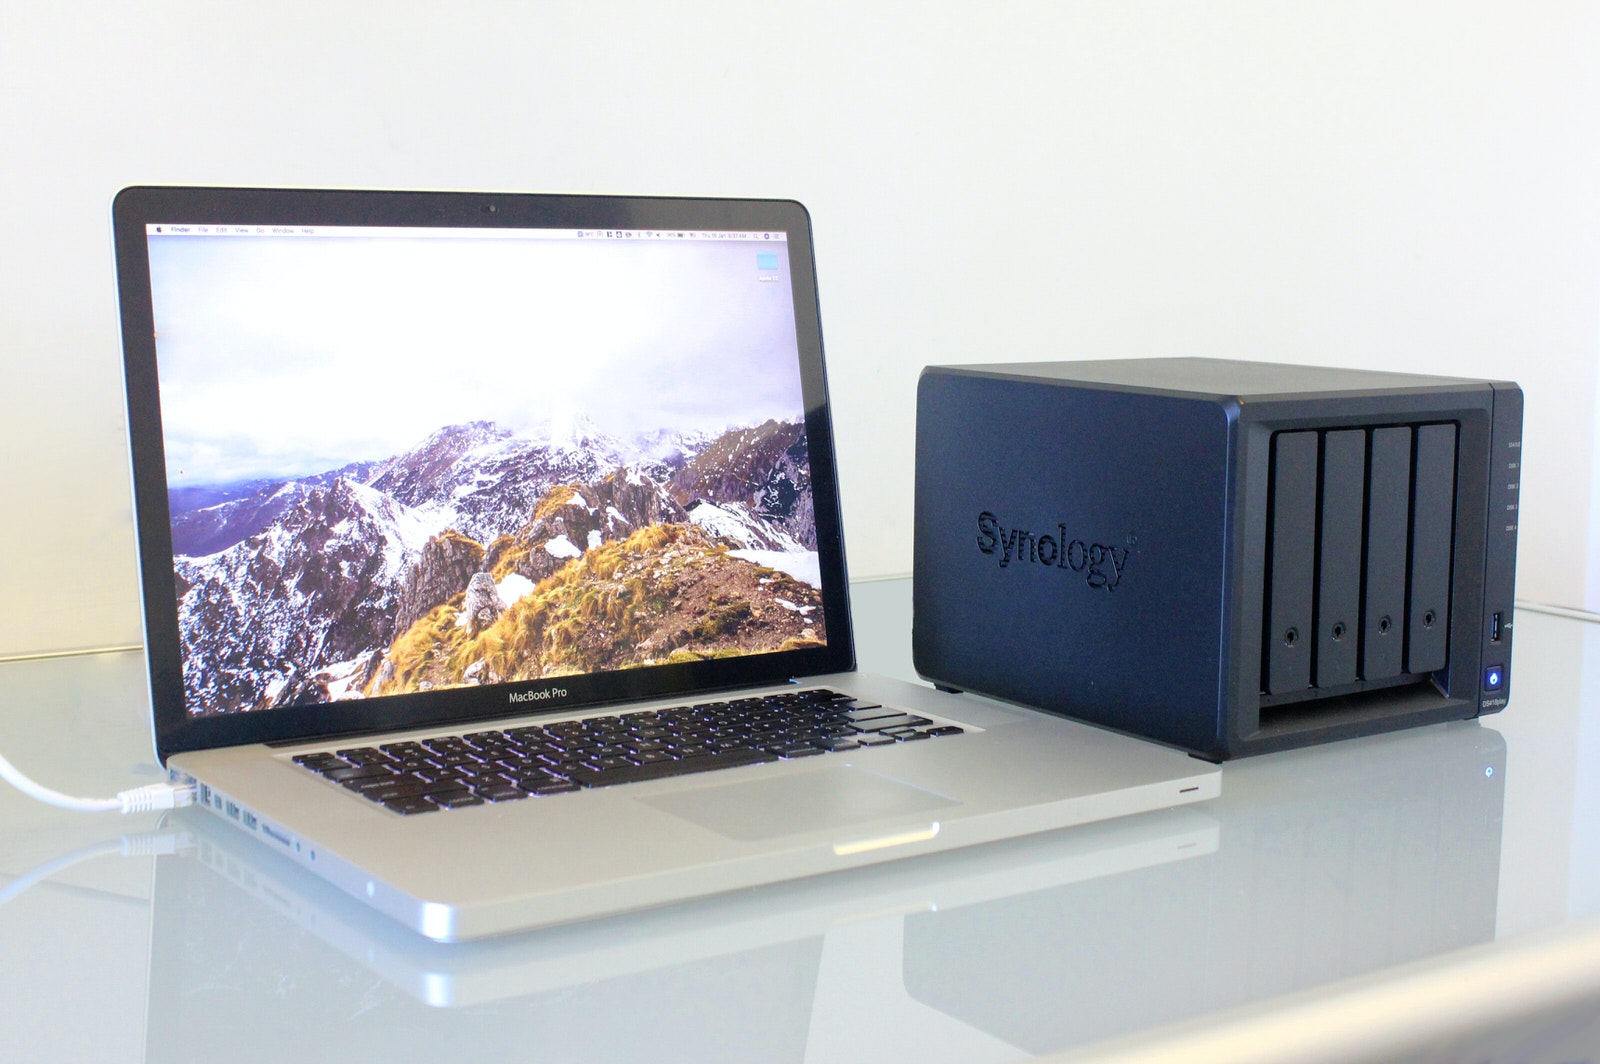 MacBook Pro laptop with a Synology NAS storage unit set up on a home office desk.